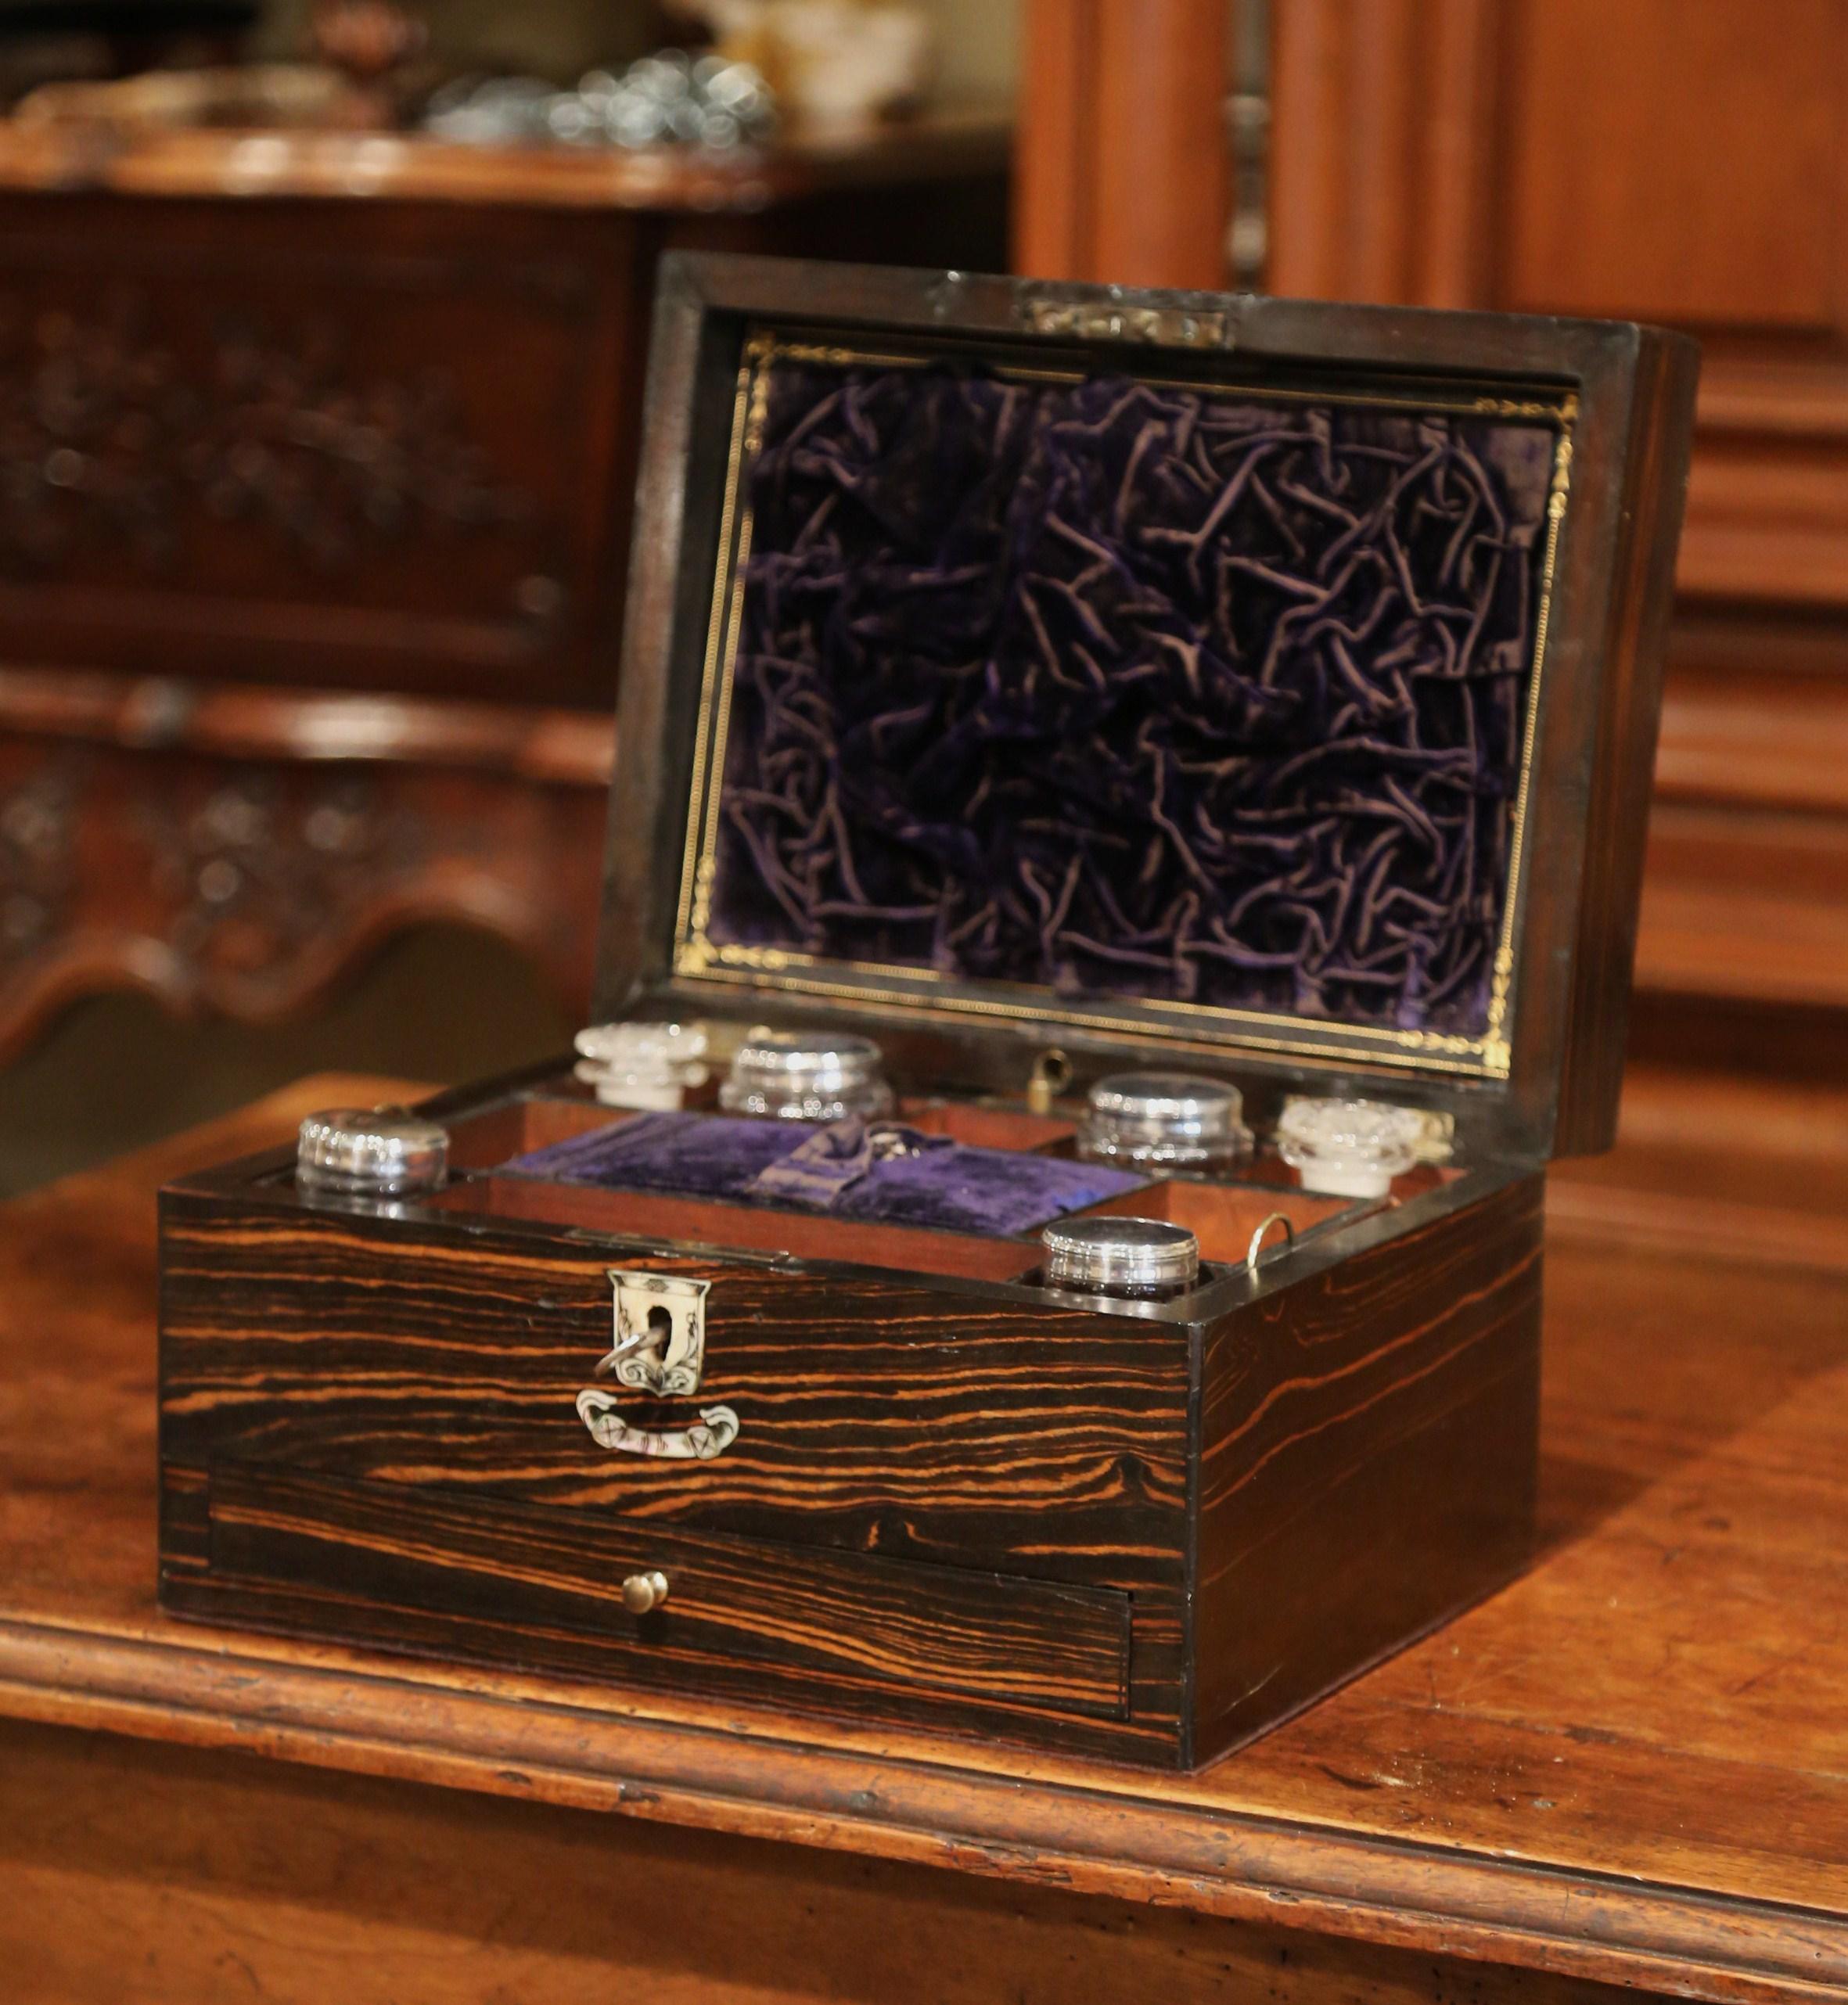 This beautiful, antique jewelry box set was crafted in France, circa 1870. The box has a mother of pearl crest on the top and front, and reveals several dividers inside while the compartments are outfitted with silver and glass containers. The